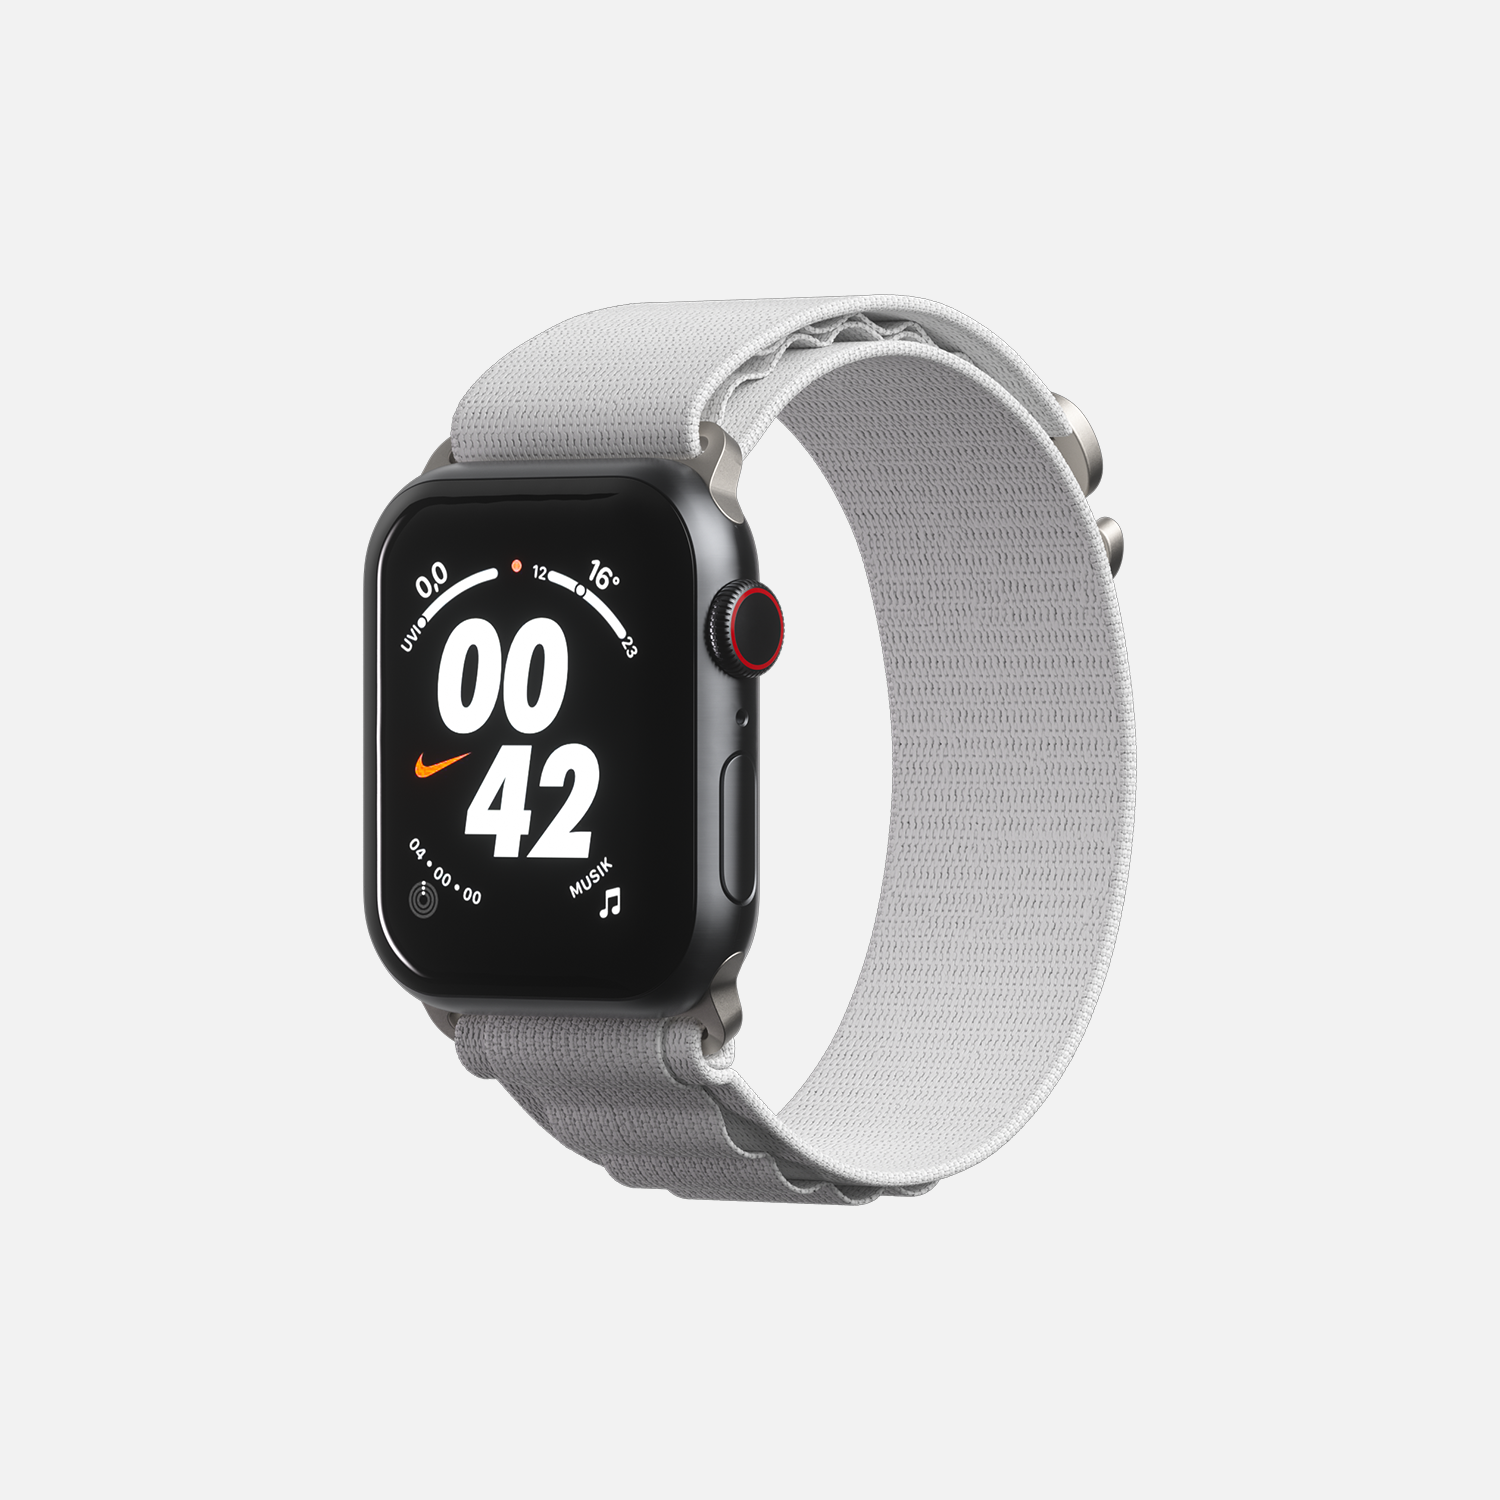 Smartwatch with black display, silver case, and gray sport band on white background"